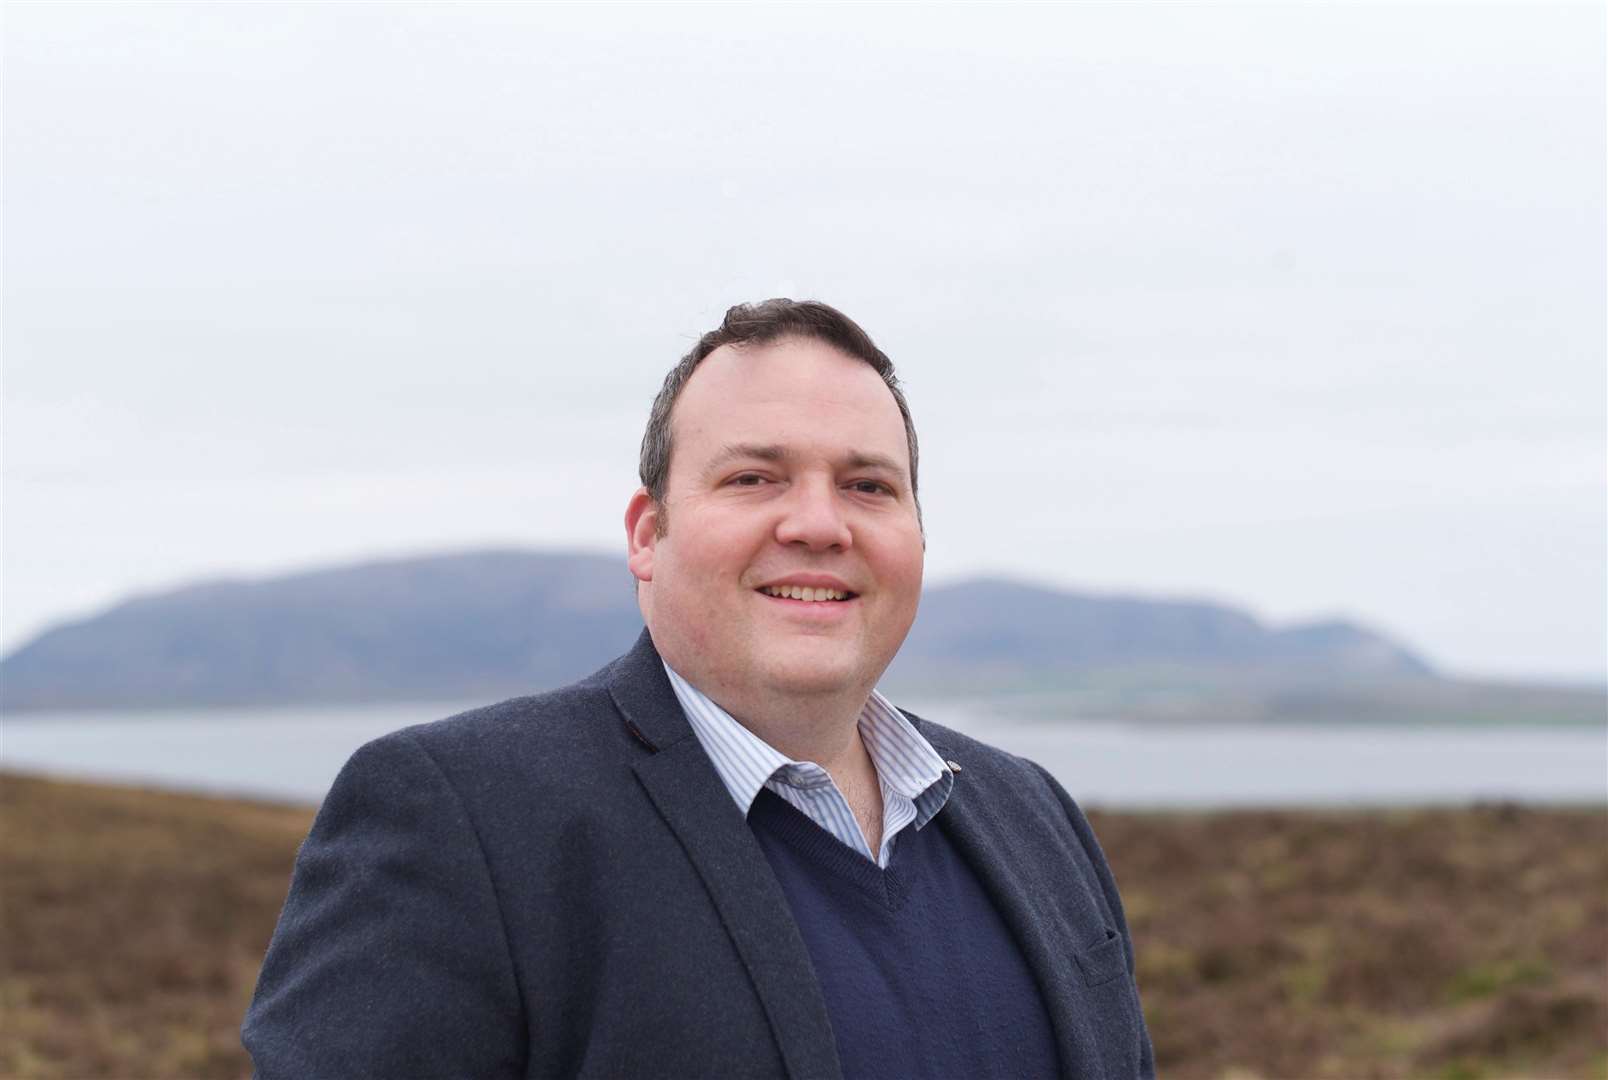 Jamie Halcro-Johnston is enjoying his new role in the Scottish Conservatives' shadow cabinet.